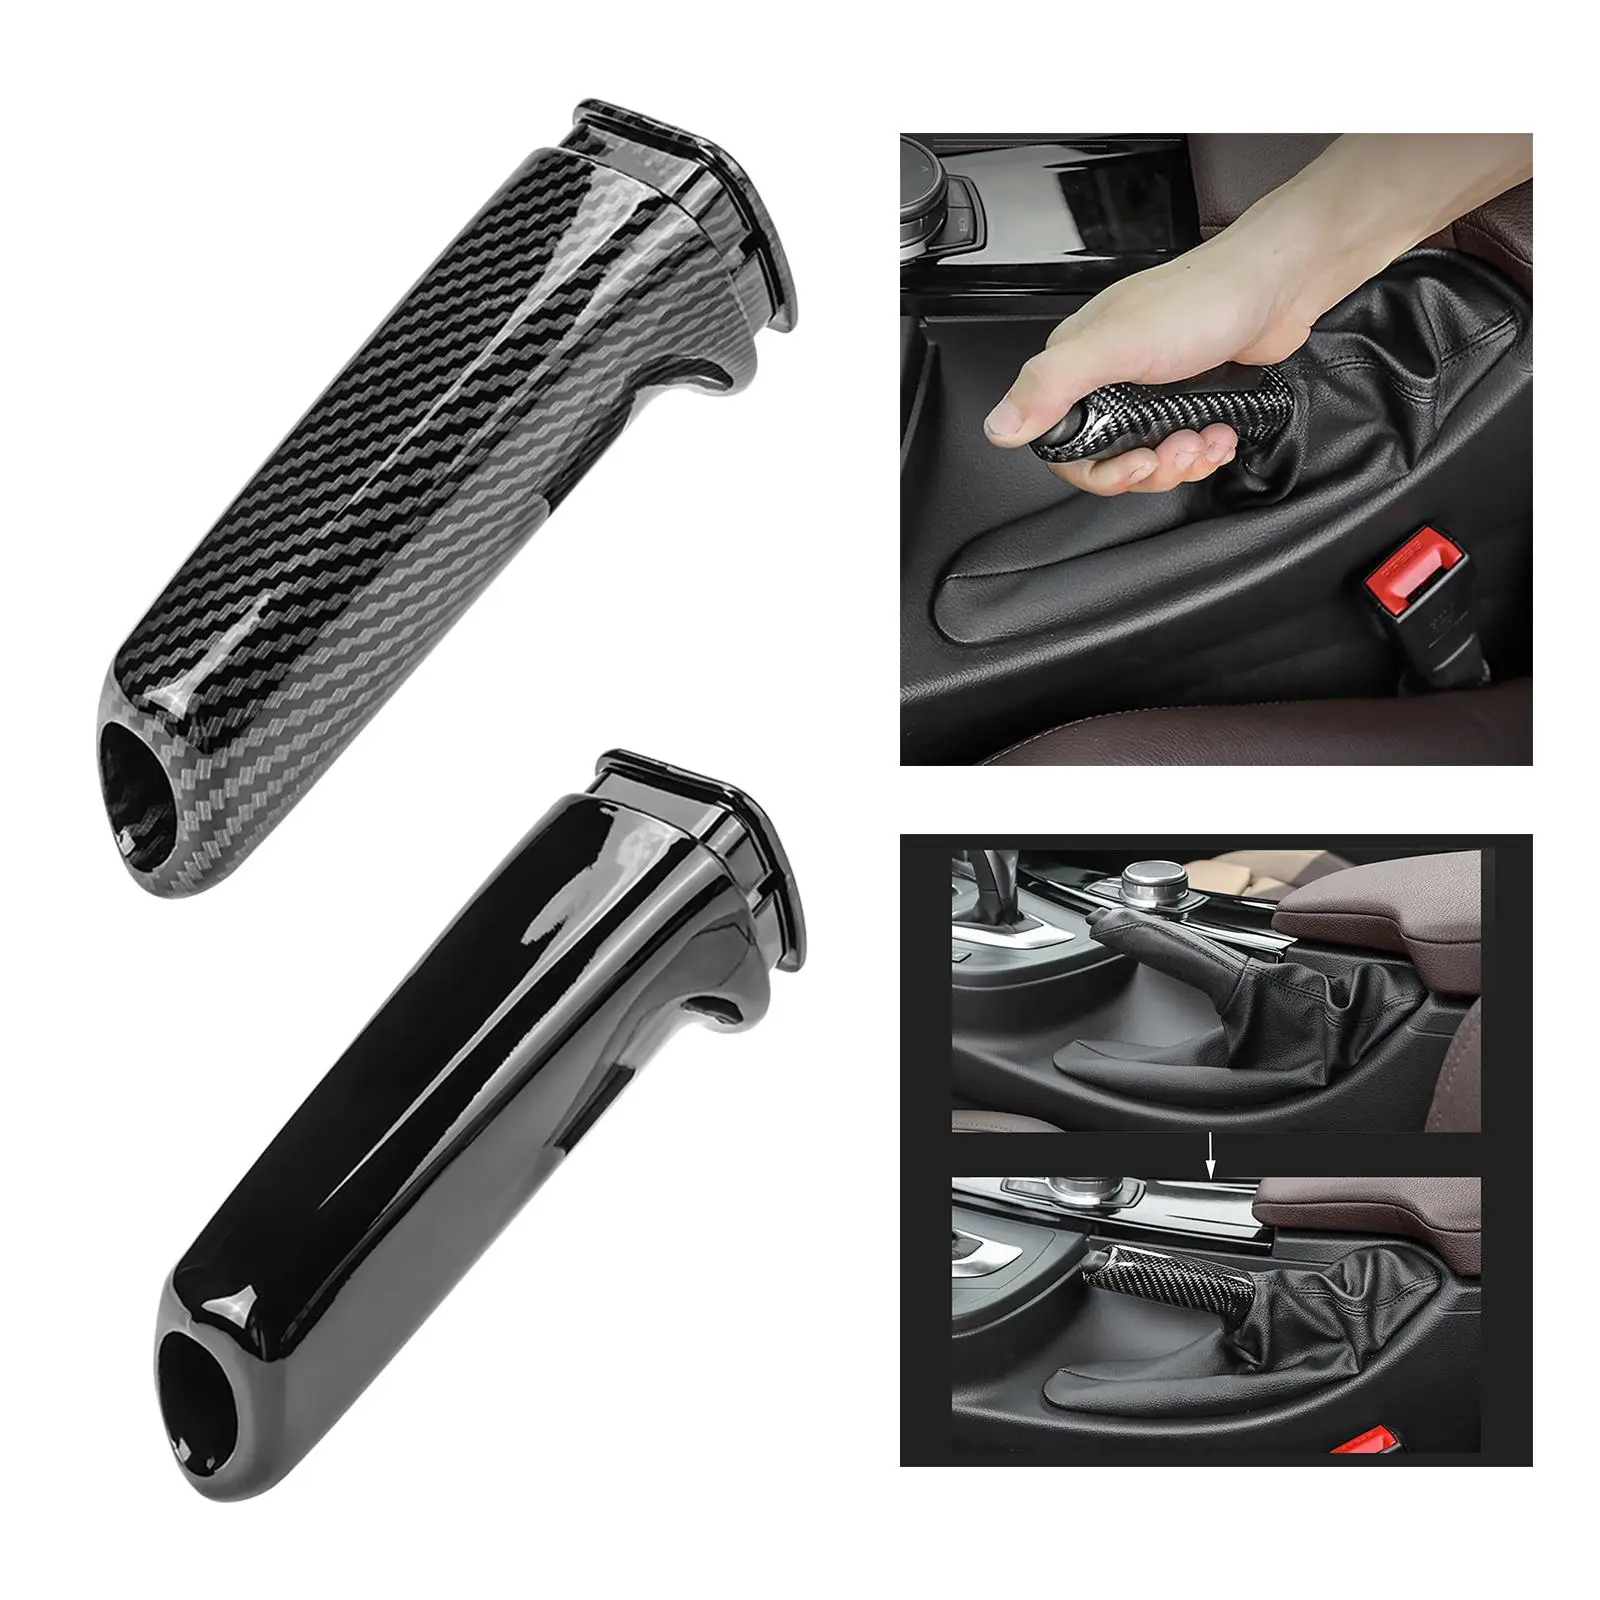 Replacement Handbrake Cover Interior Accessories Handle Protector Cover Handbrake Sleeves Handle Sticker for bmw F30 F34